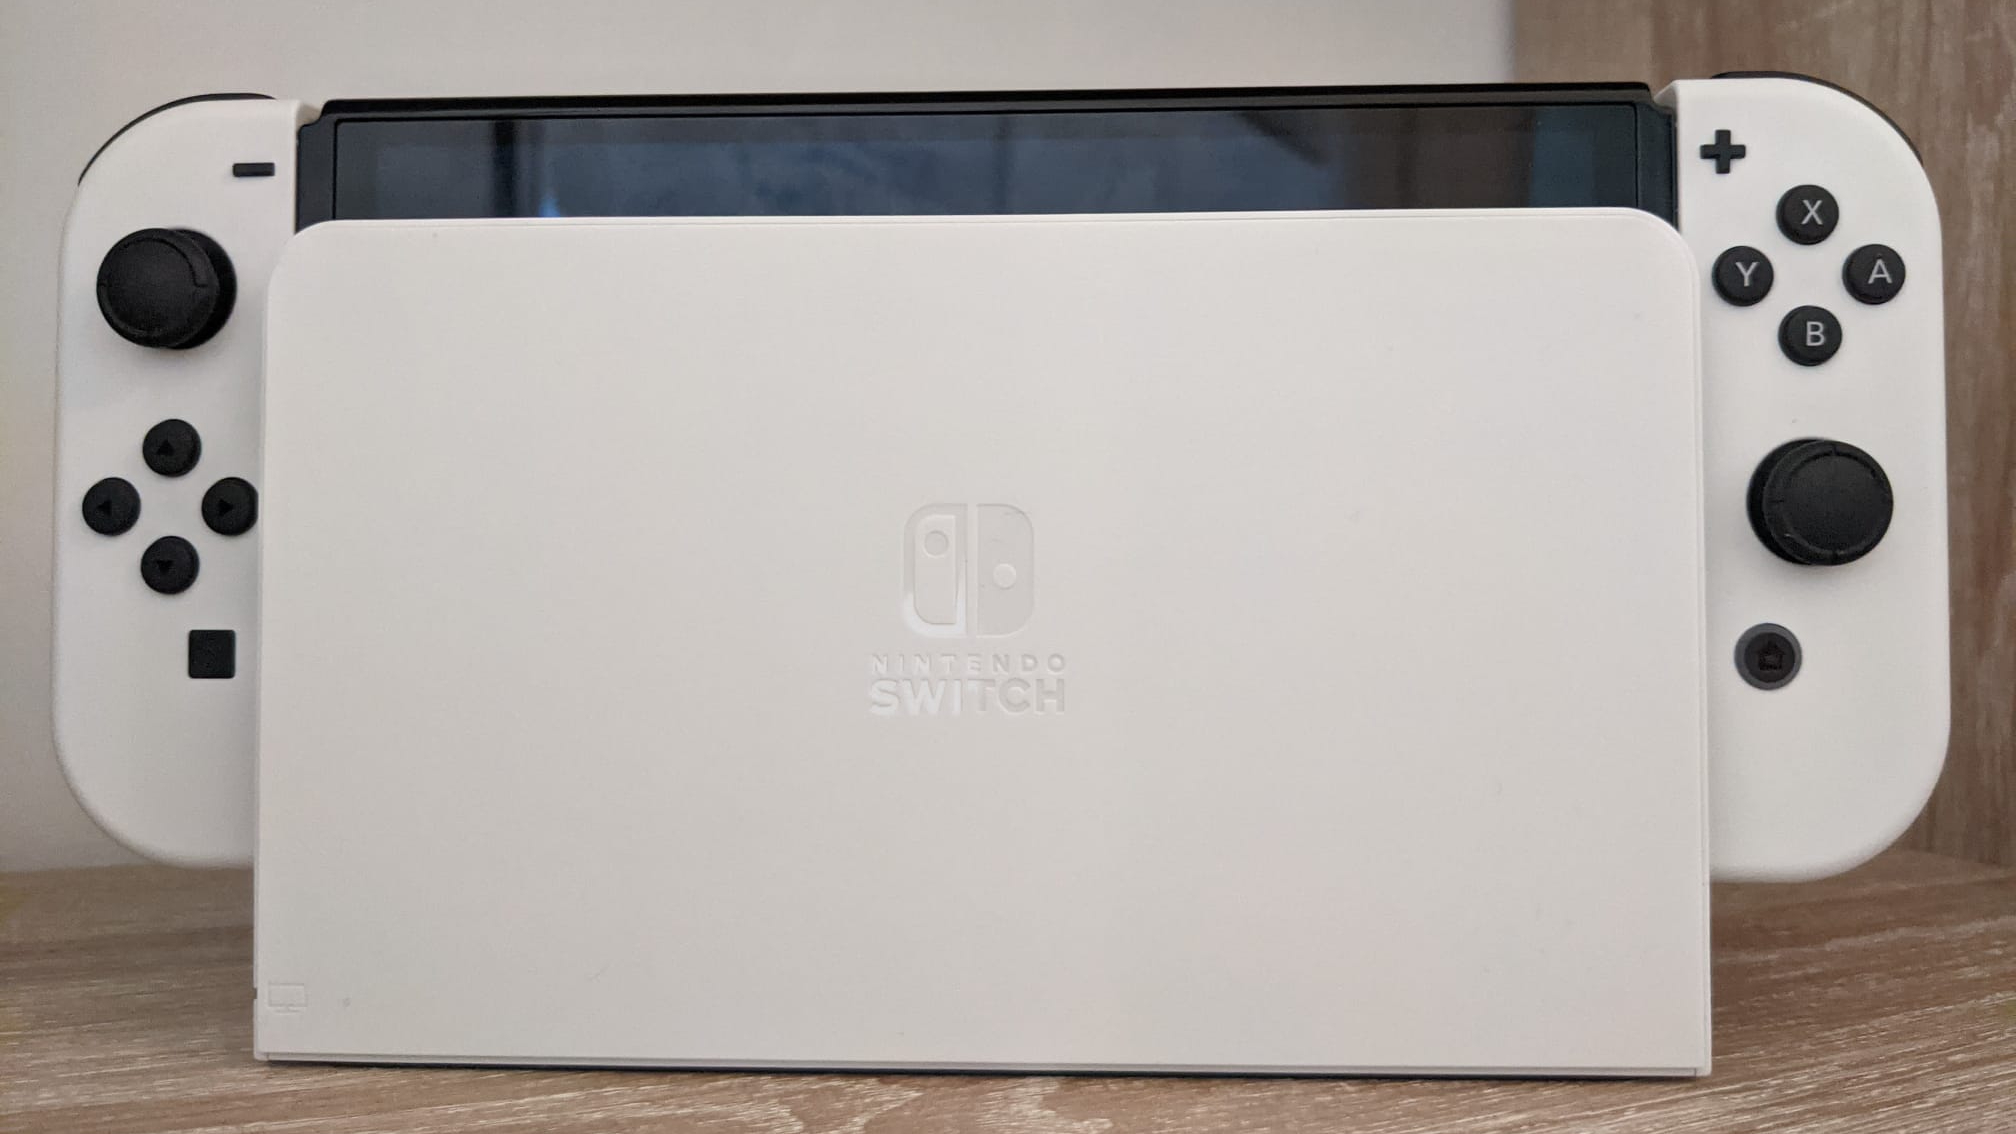 Nintendo Switch OLED in the dock